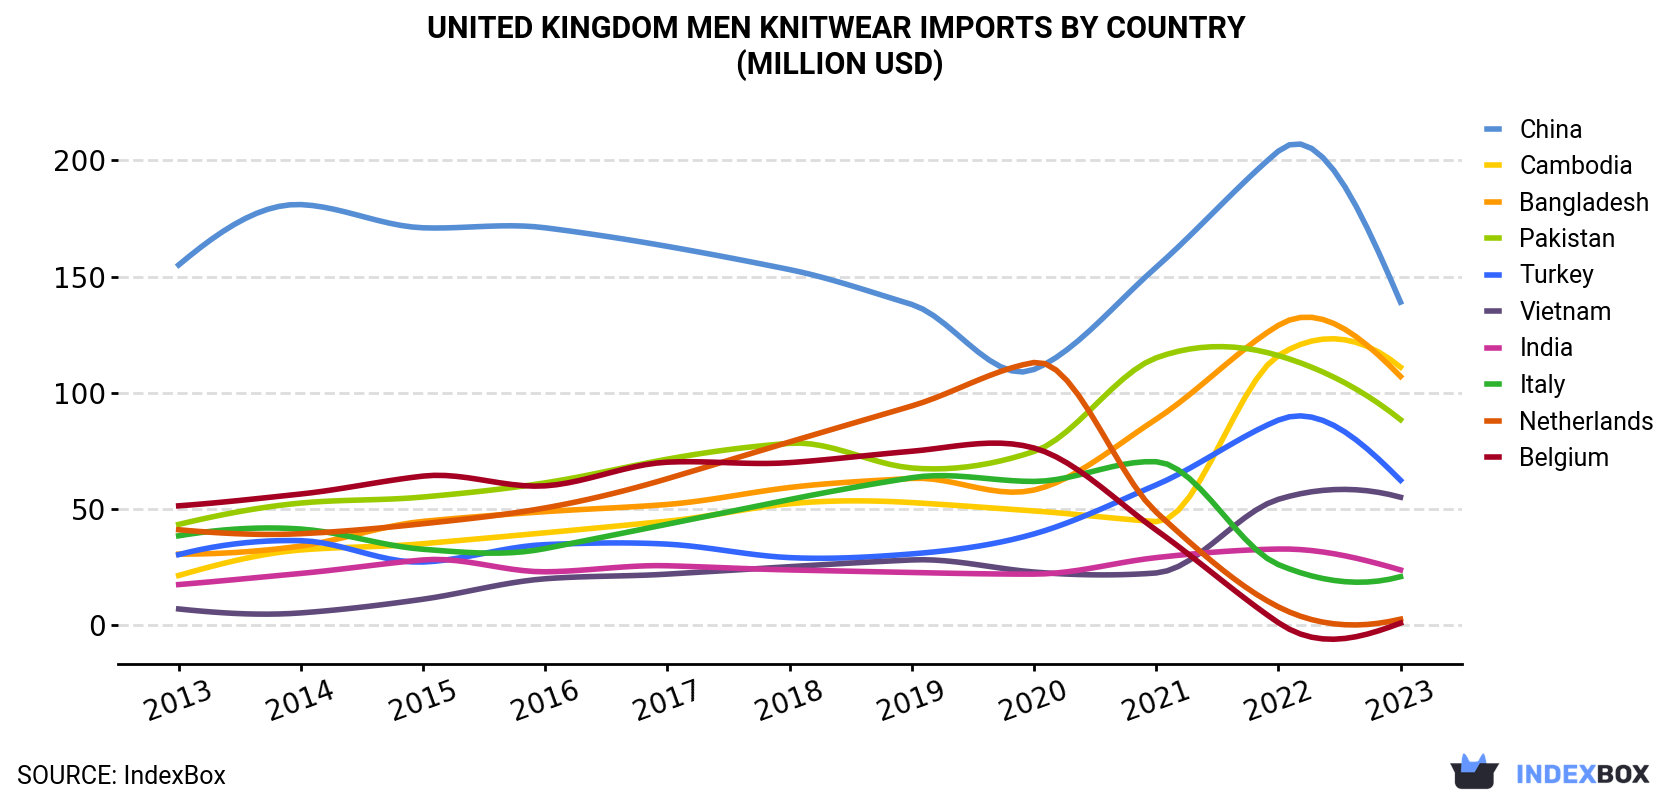 United Kingdom Men Knitwear Imports By Country (Million USD)